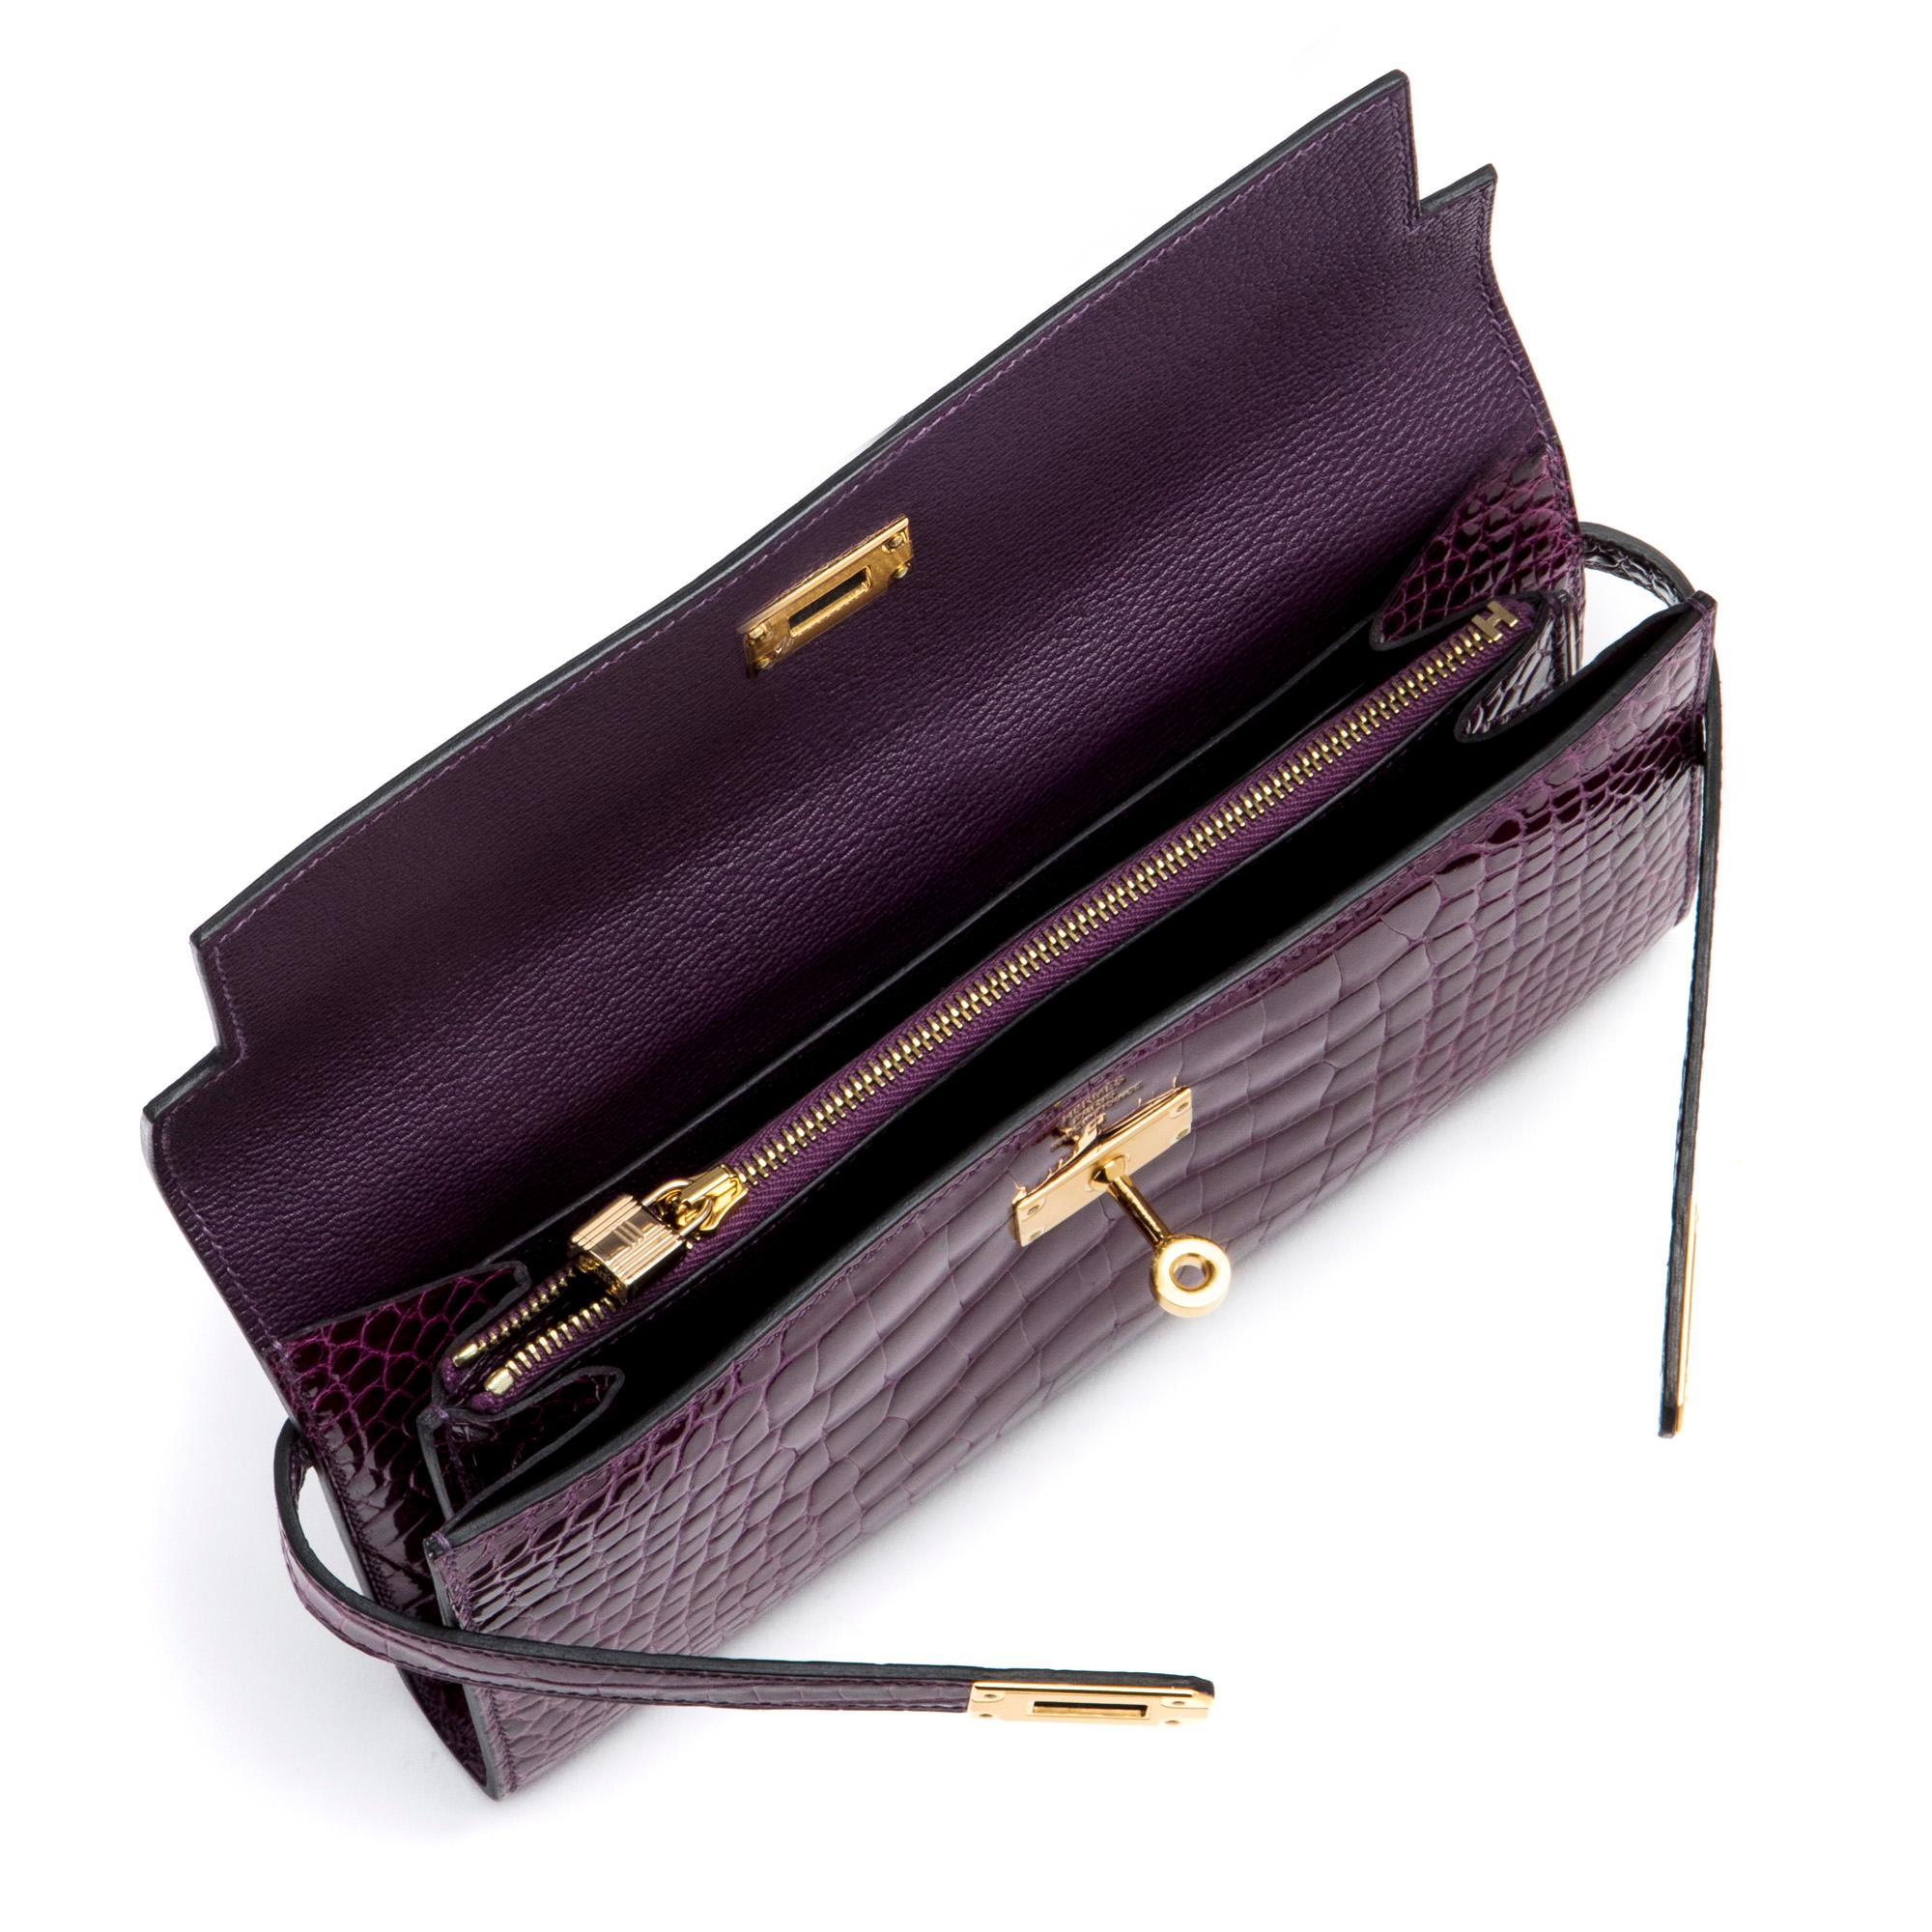 Hermés Amethyste Crocodile Clutch In Excellent Condition For Sale In New York, NY